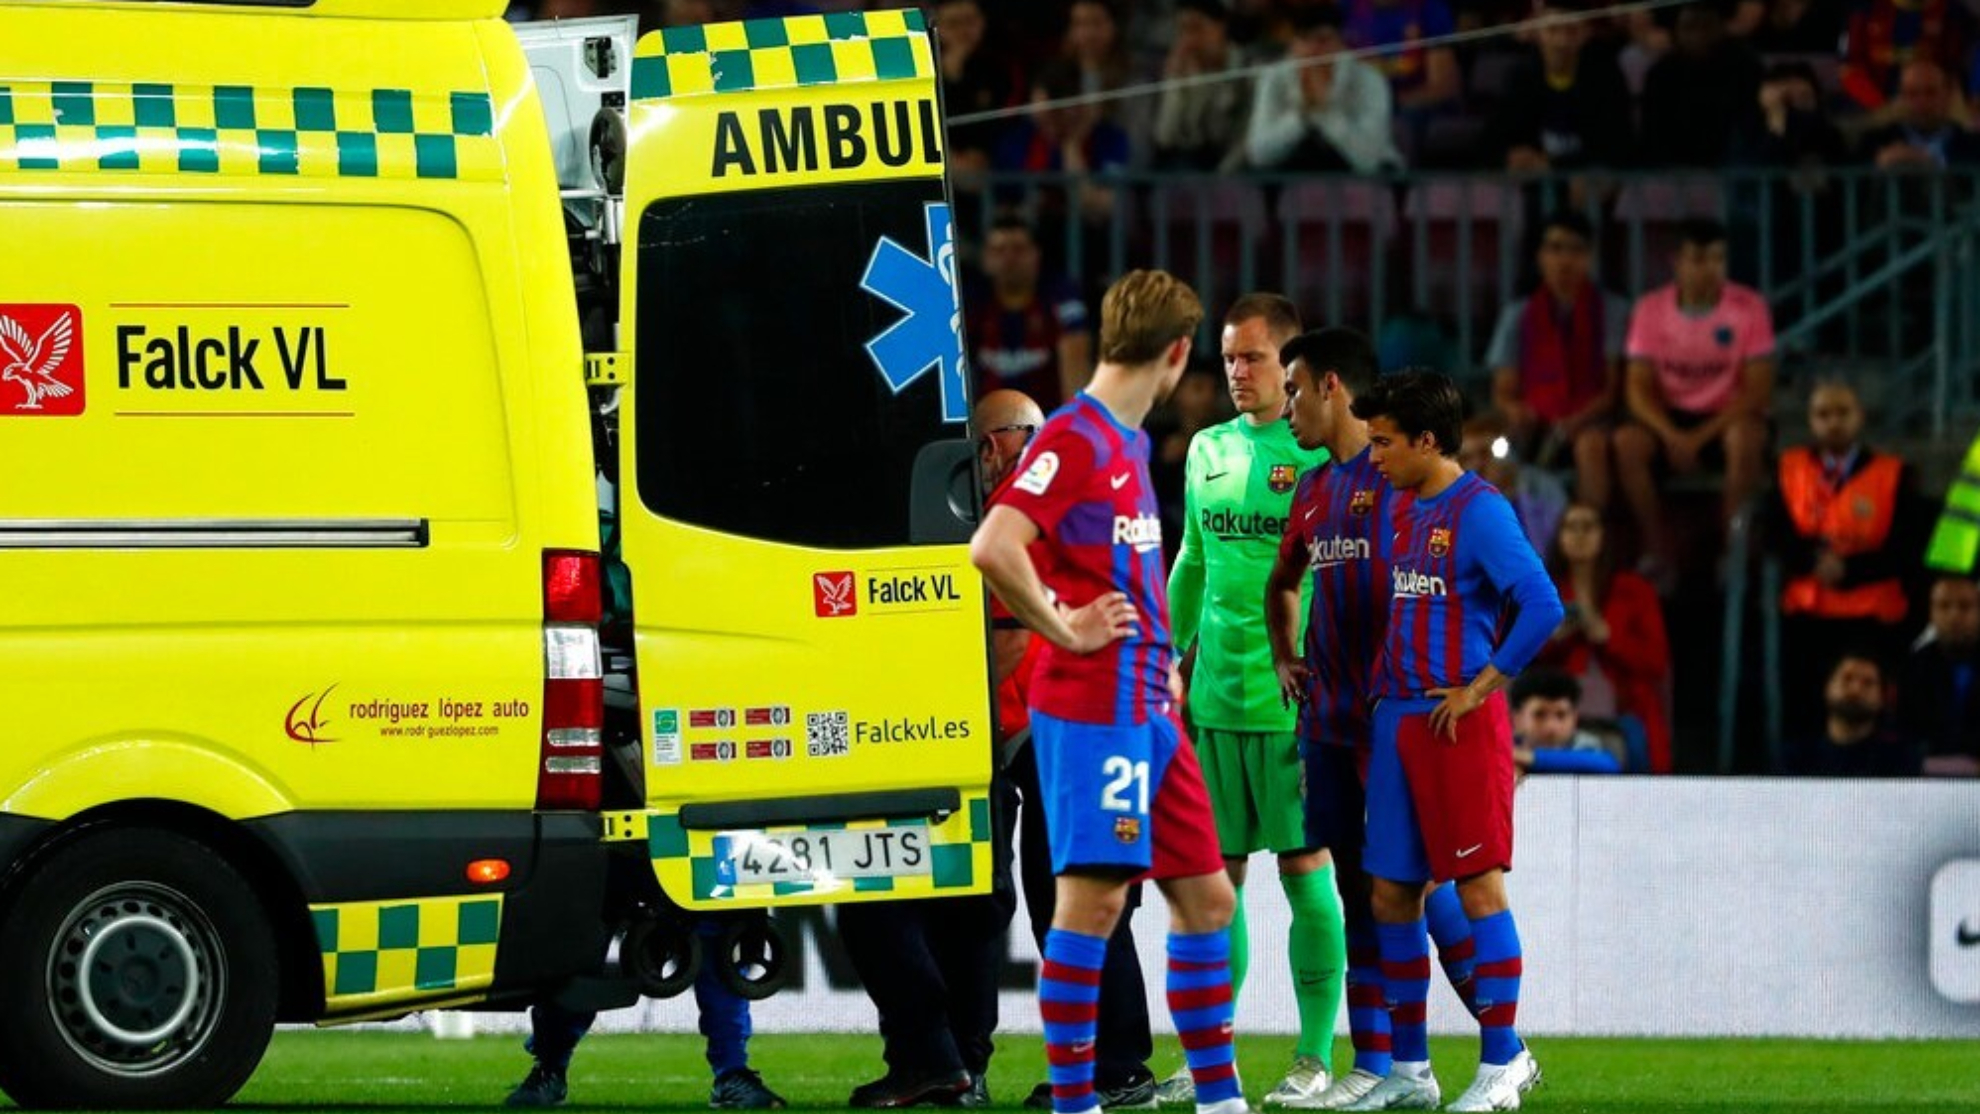 Araujo spent seven minutes lying on the grass before being taken by ambulance to the hospital.